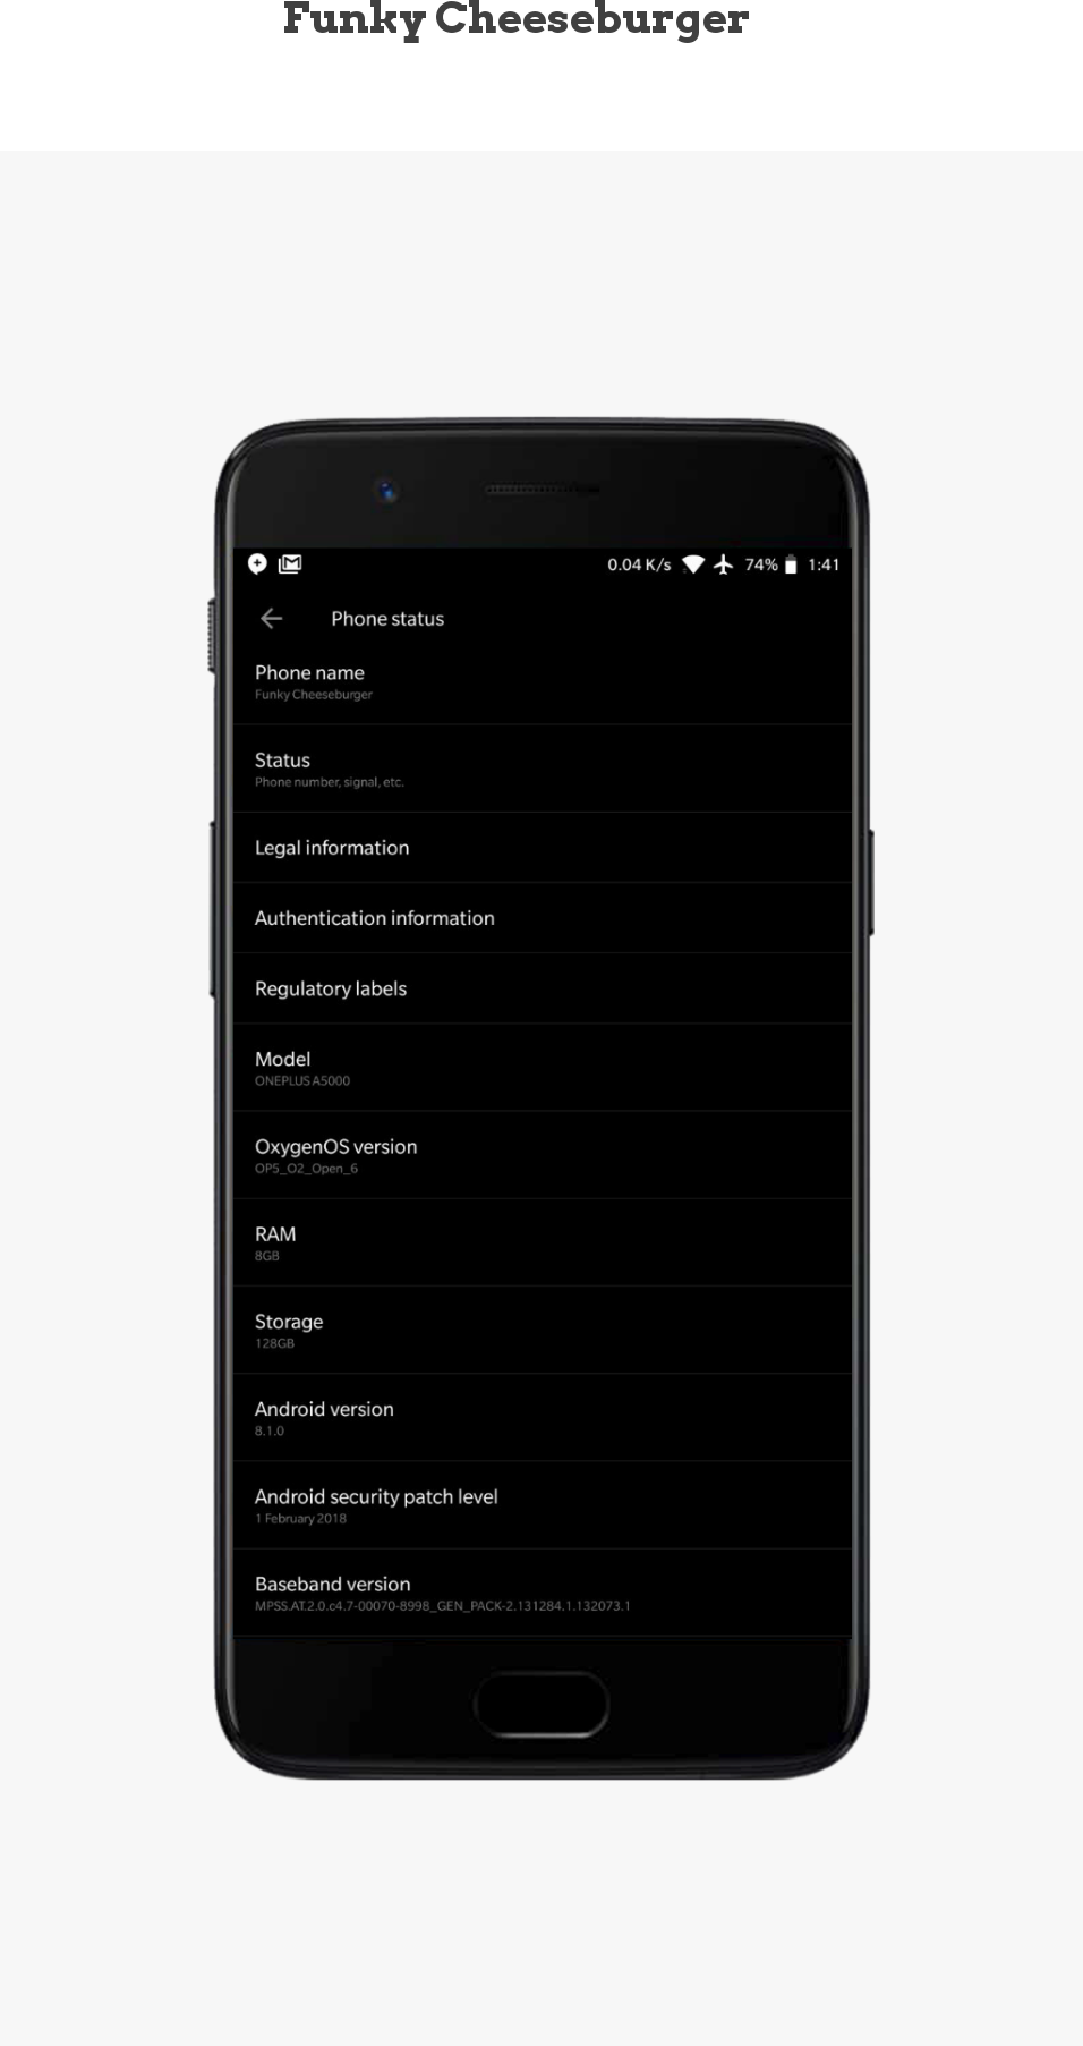 OnePlus 5 devices get Android 8.1 Oreo through Open Beta 6 update 4